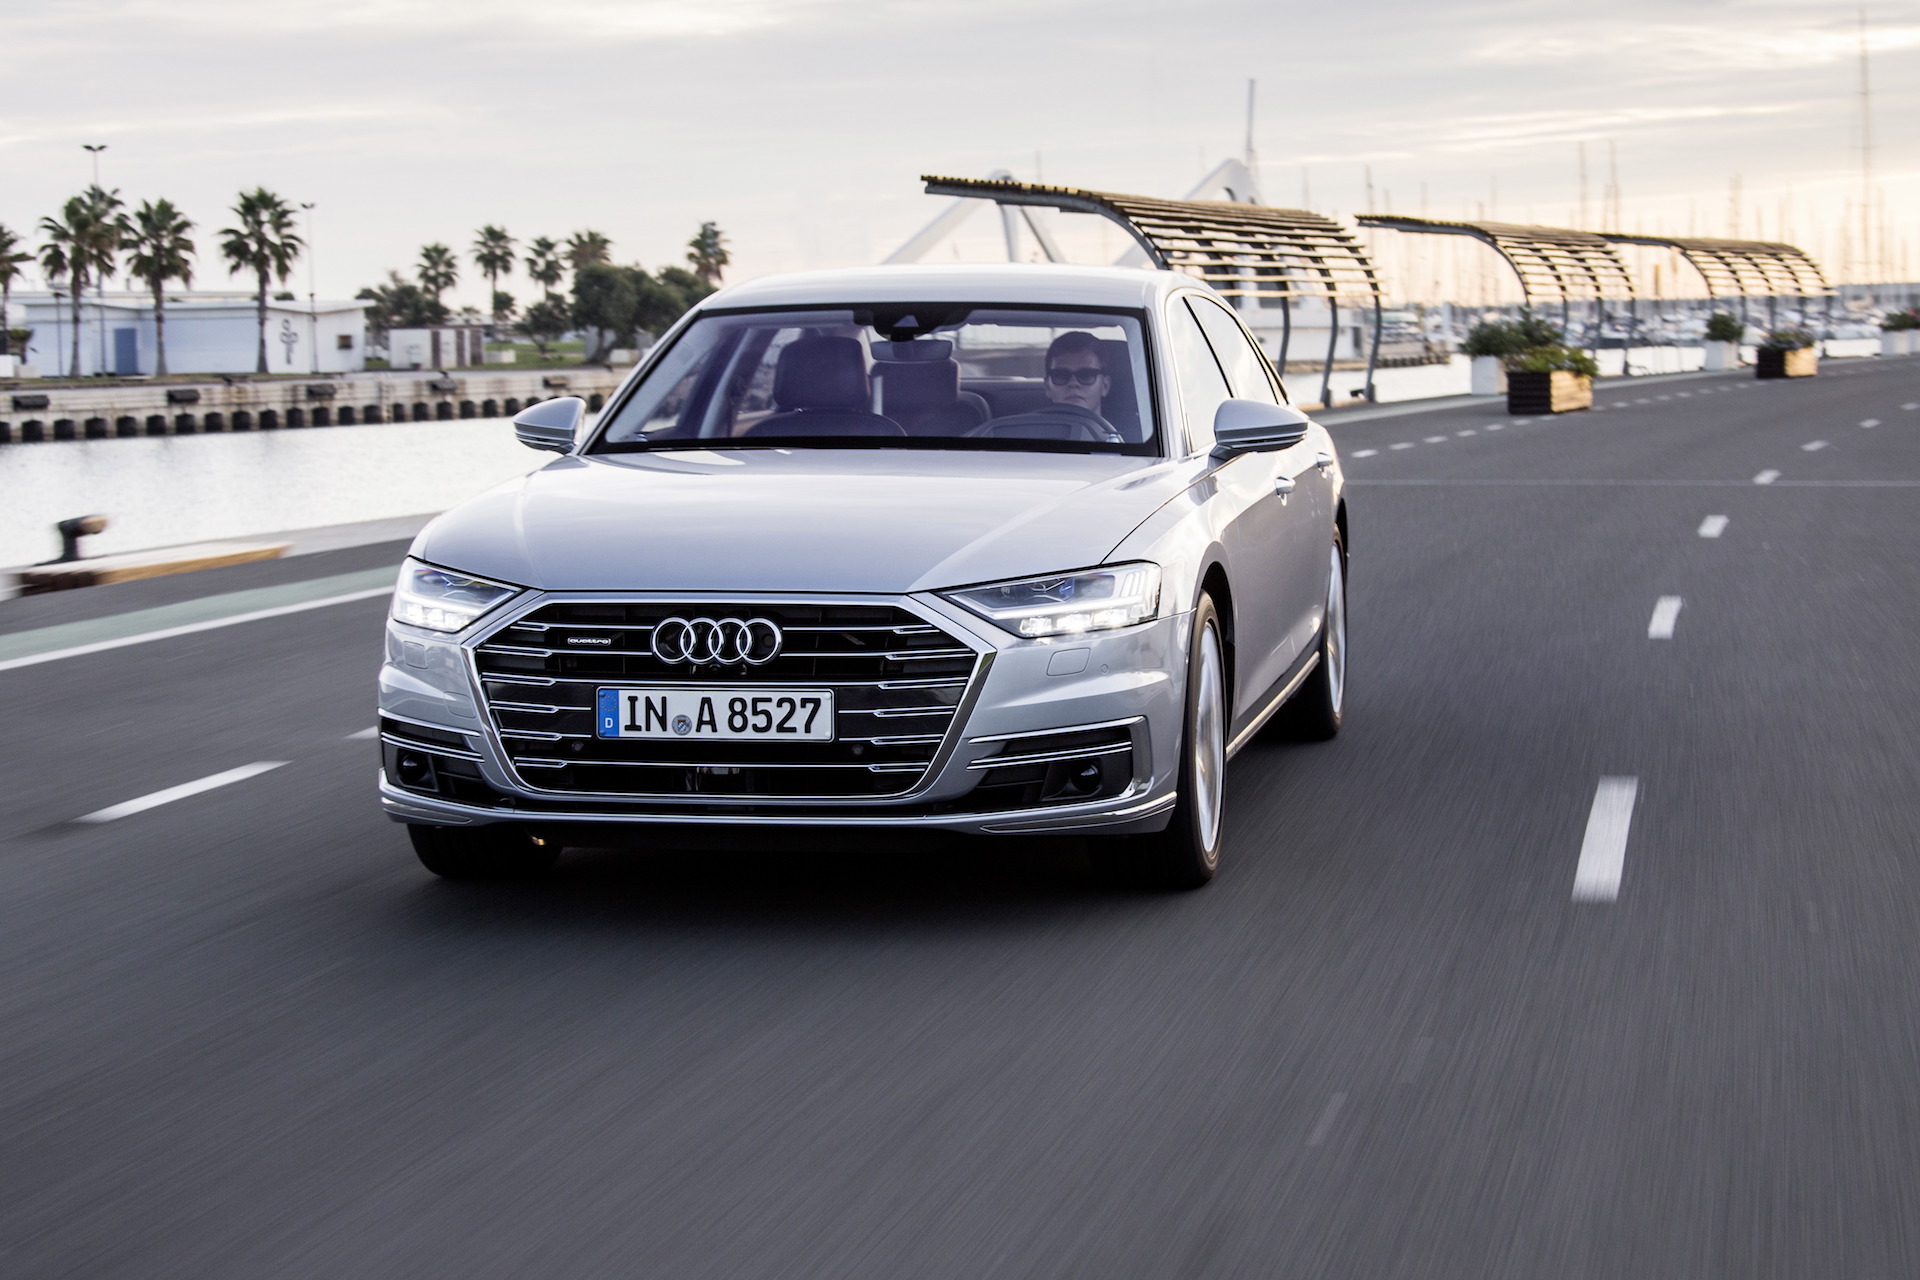 2019 Audi A8 priced, Level 3 self-driving tech not coming to US